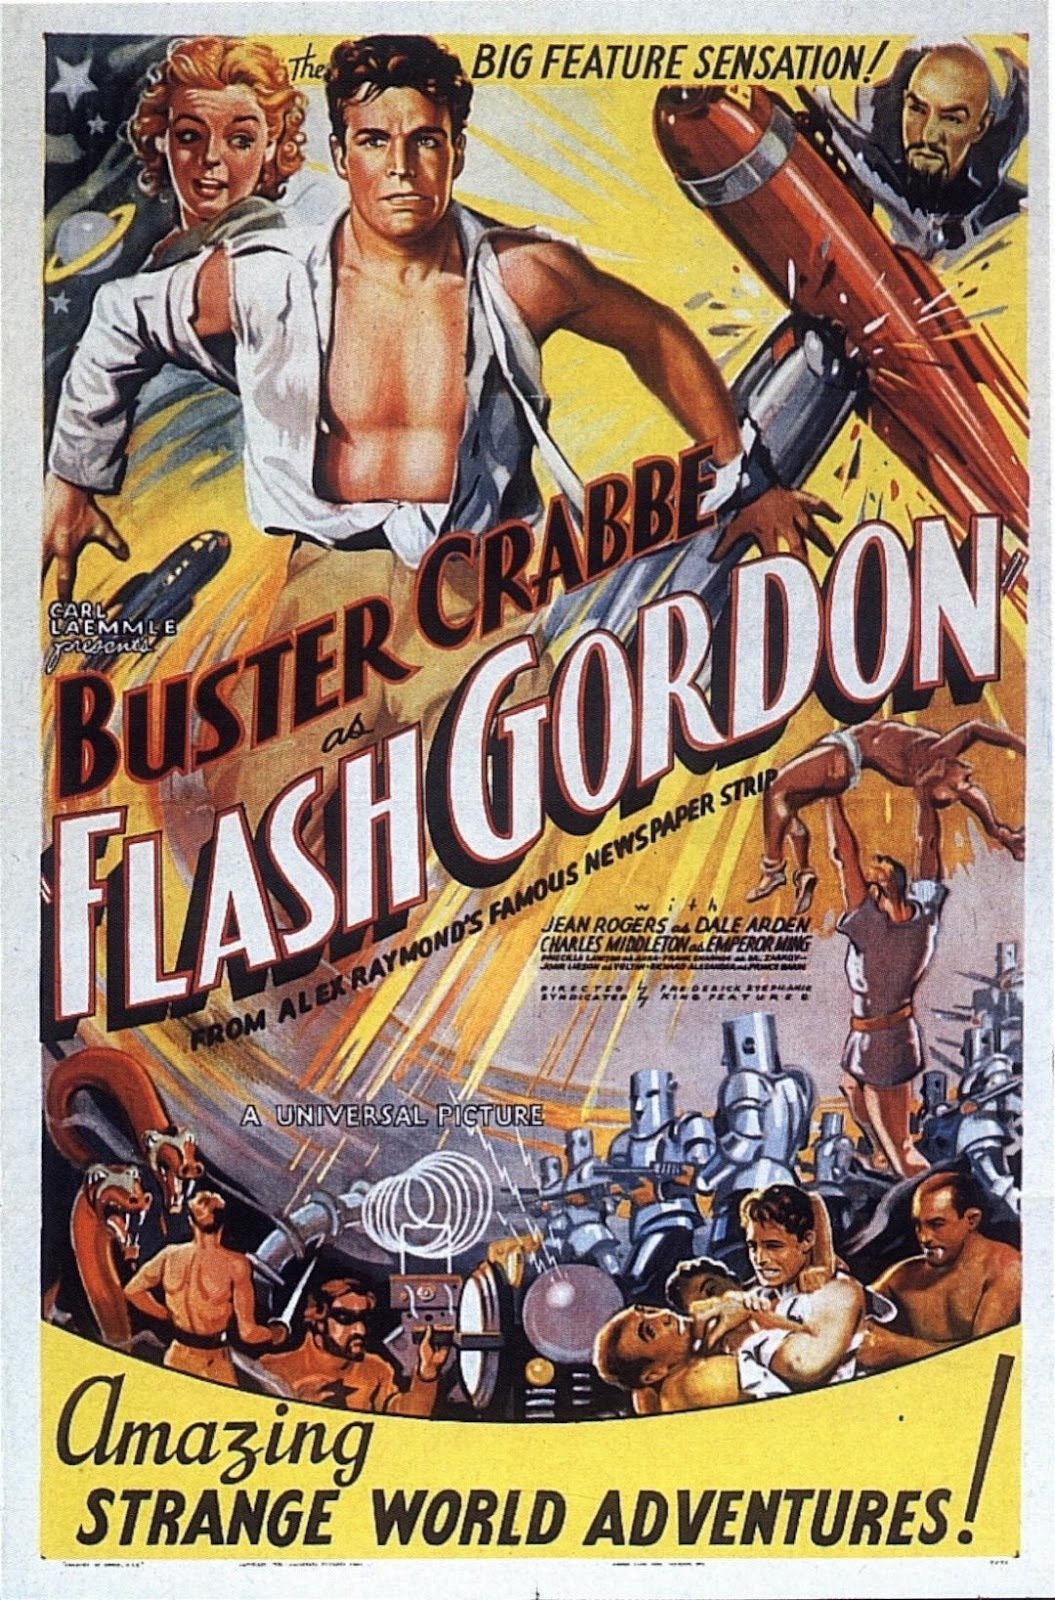 A poster for the Flash Gordon